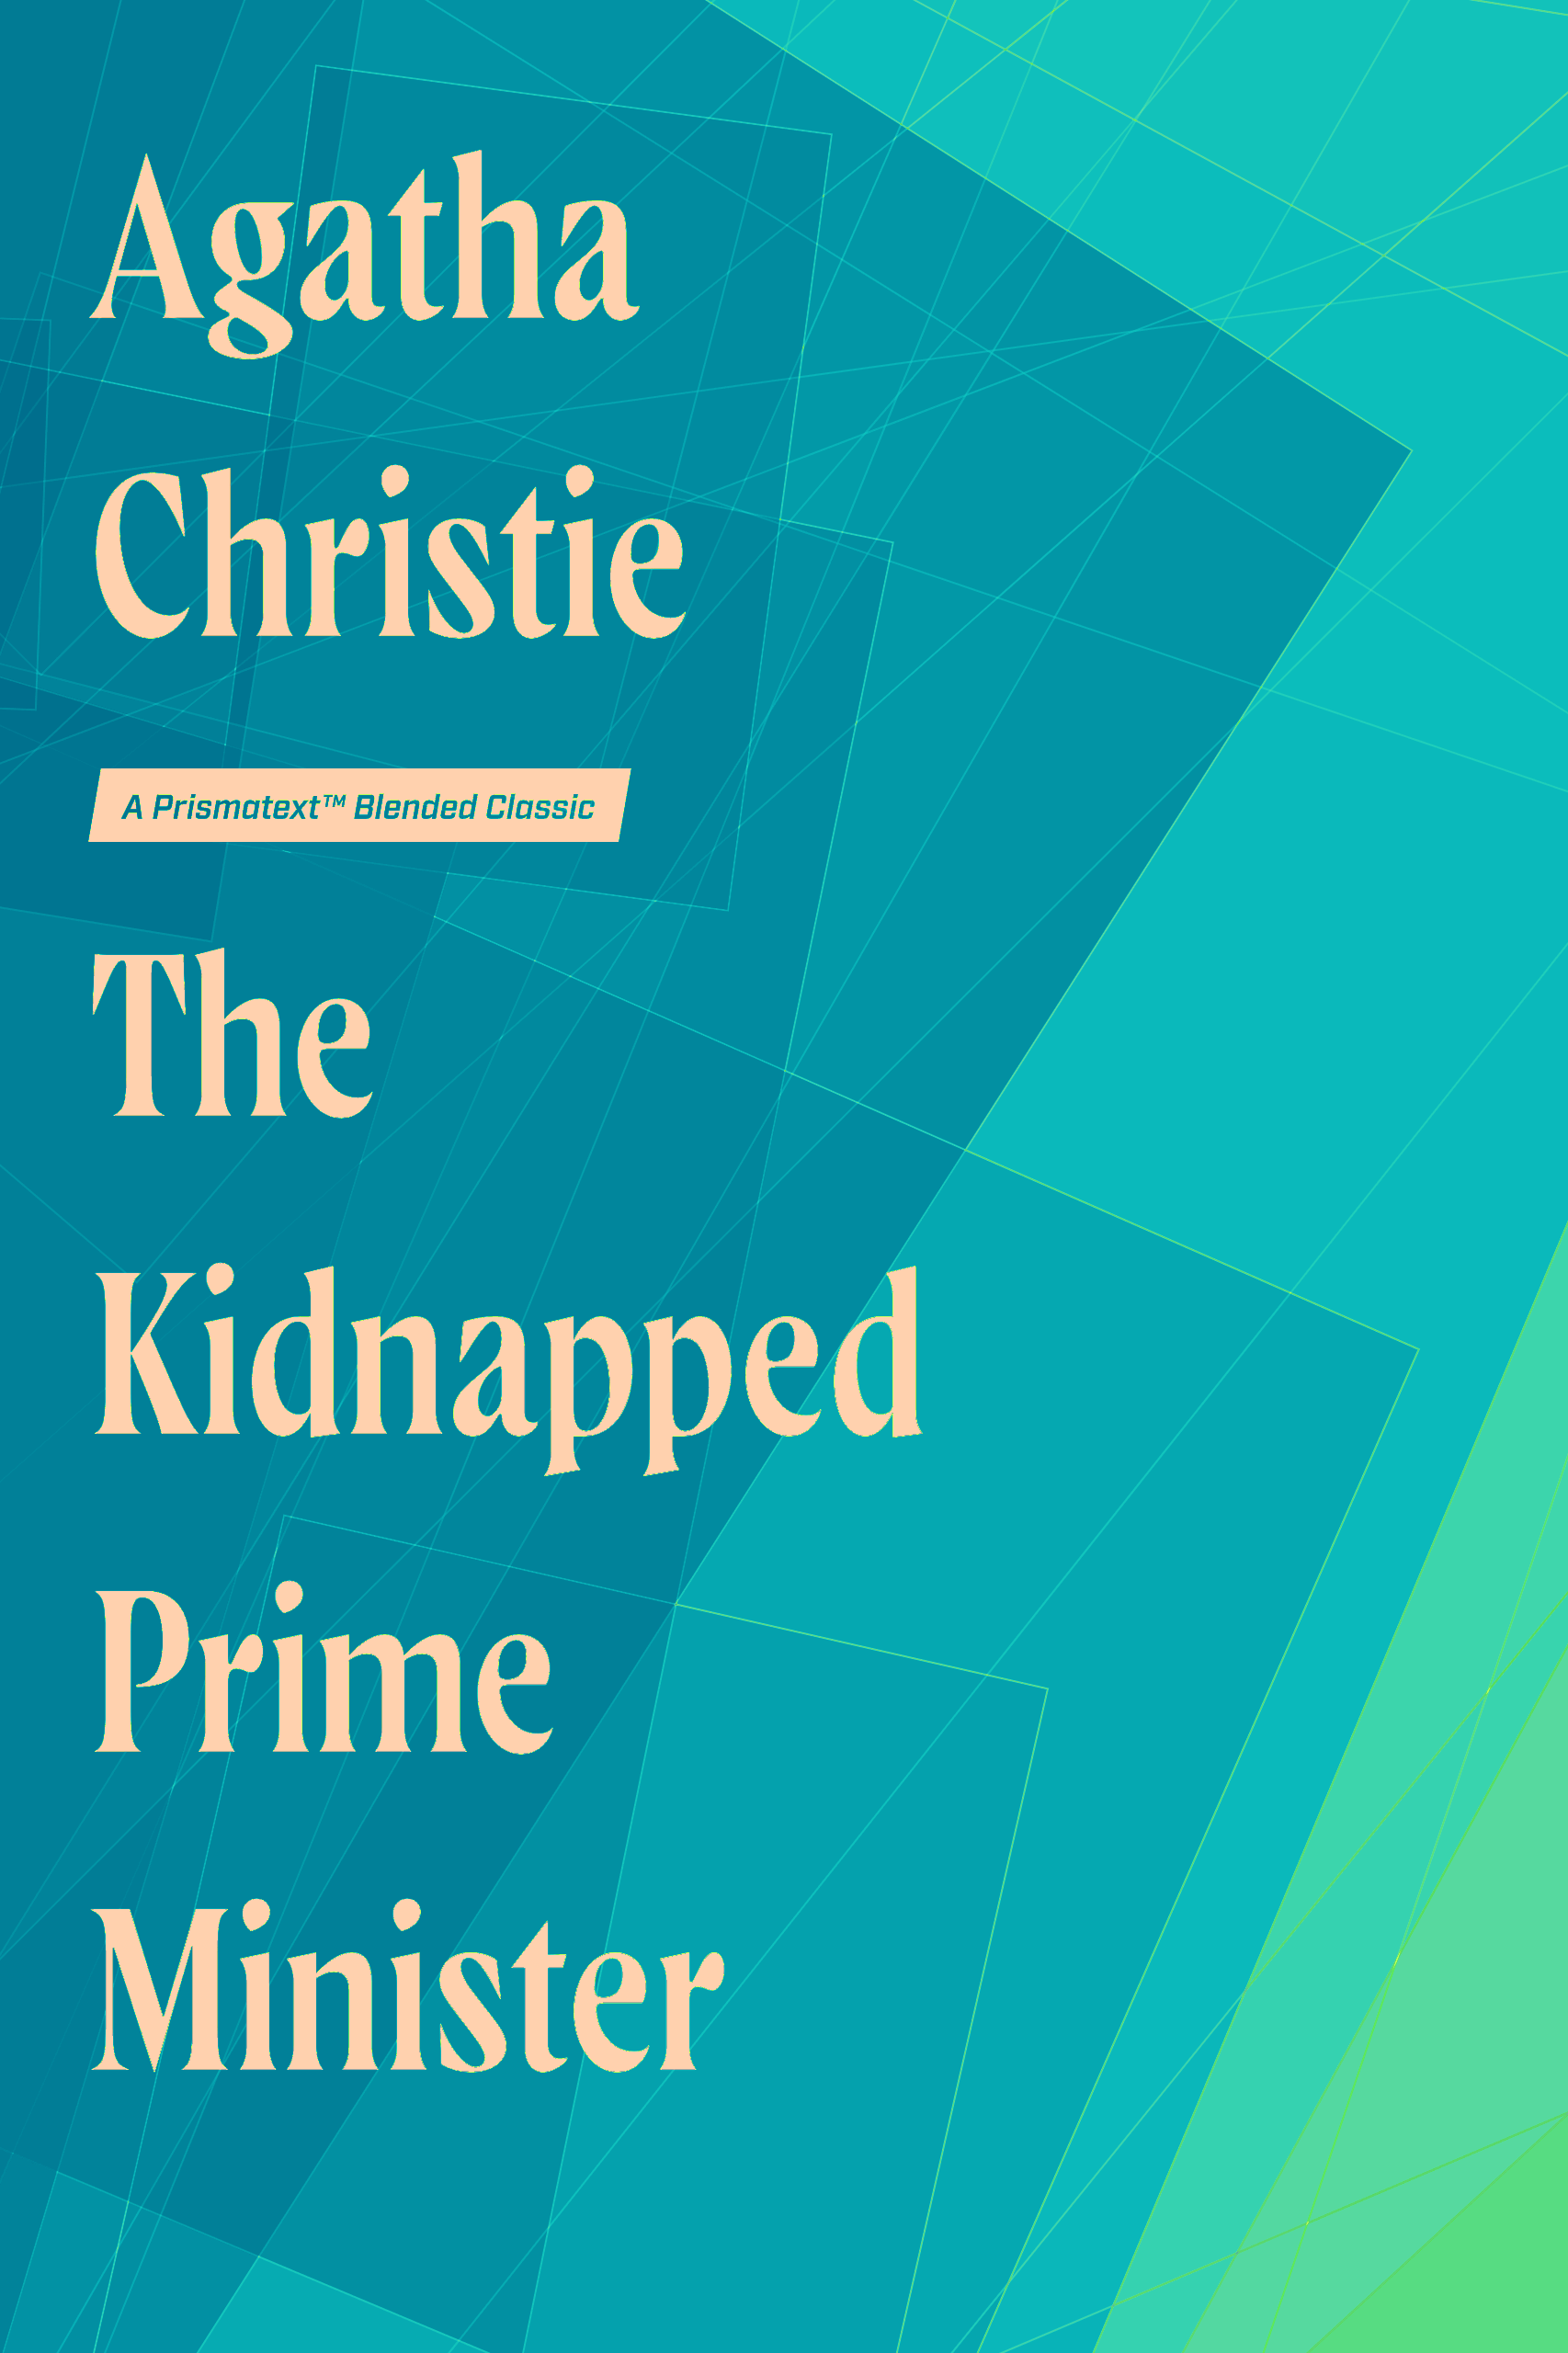 The Kidnapped Prime Minister by Agatha Christie